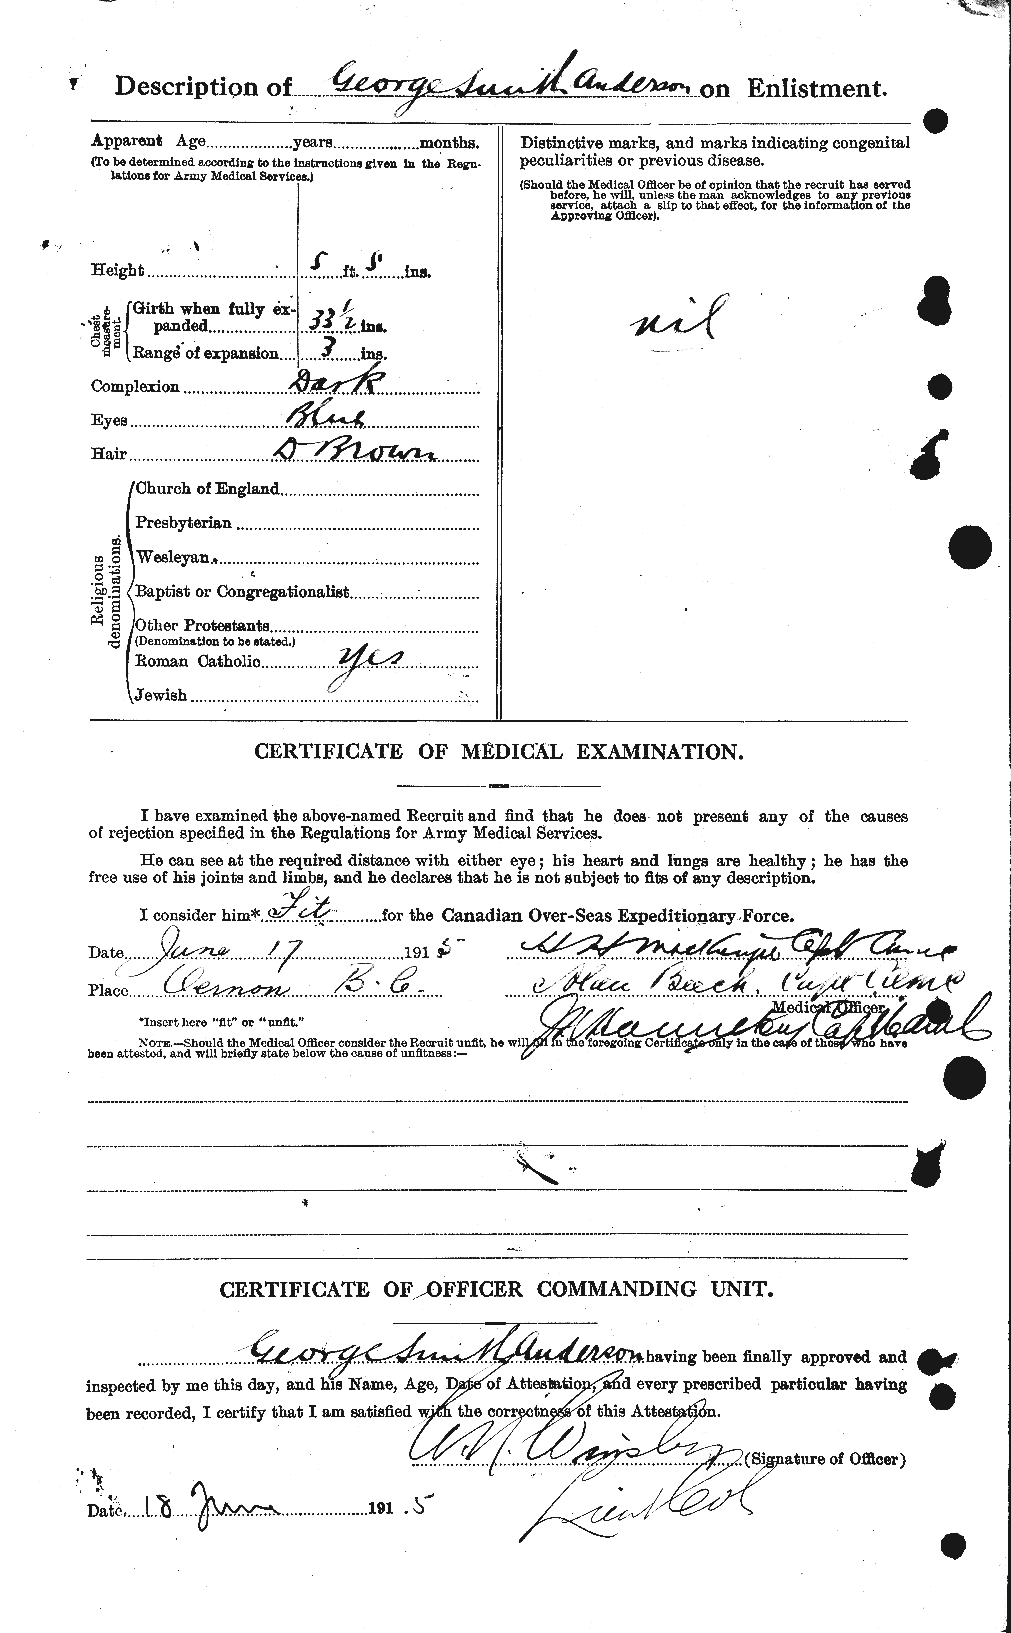 Personnel Records of the First World War - CEF 209699b